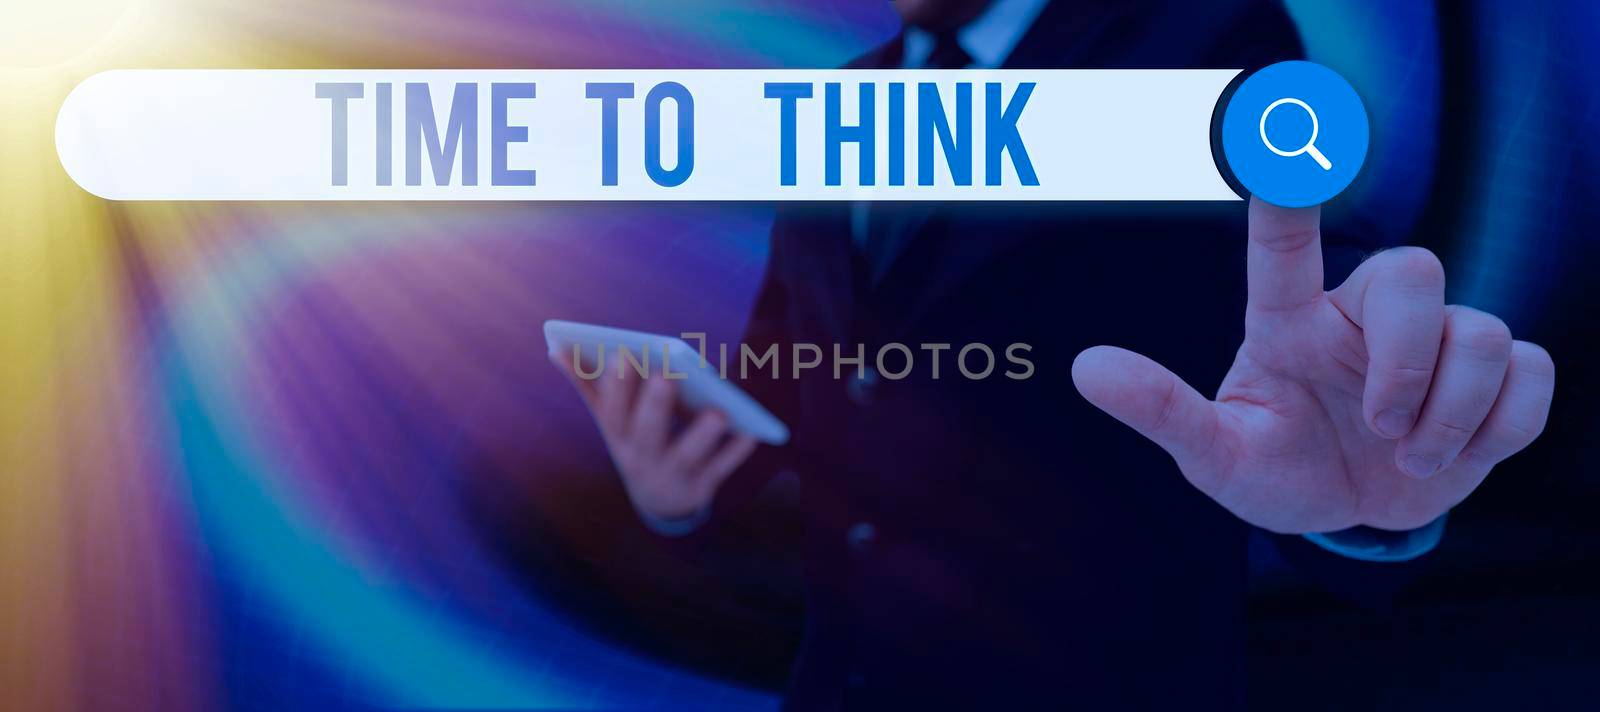 Text caption presenting Time To Think, Business overview Reconsider some things Reflection time Moment to ponder Standing Businesswoman Holding Mobile Phone With Important Messages.